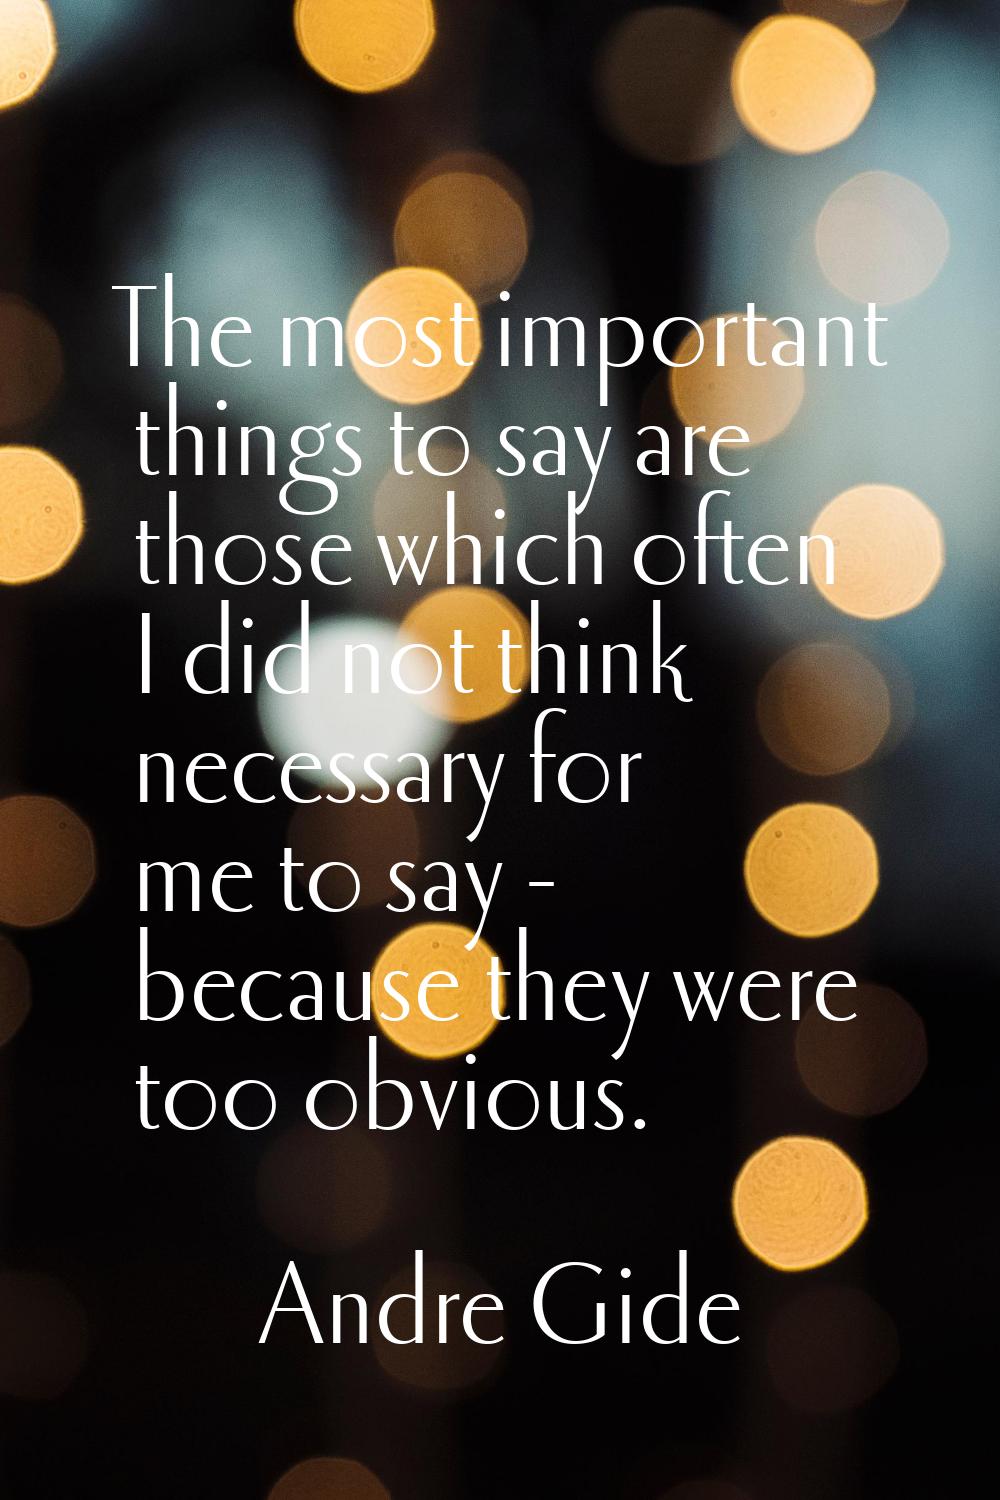 The most important things to say are those which often I did not think necessary for me to say - be